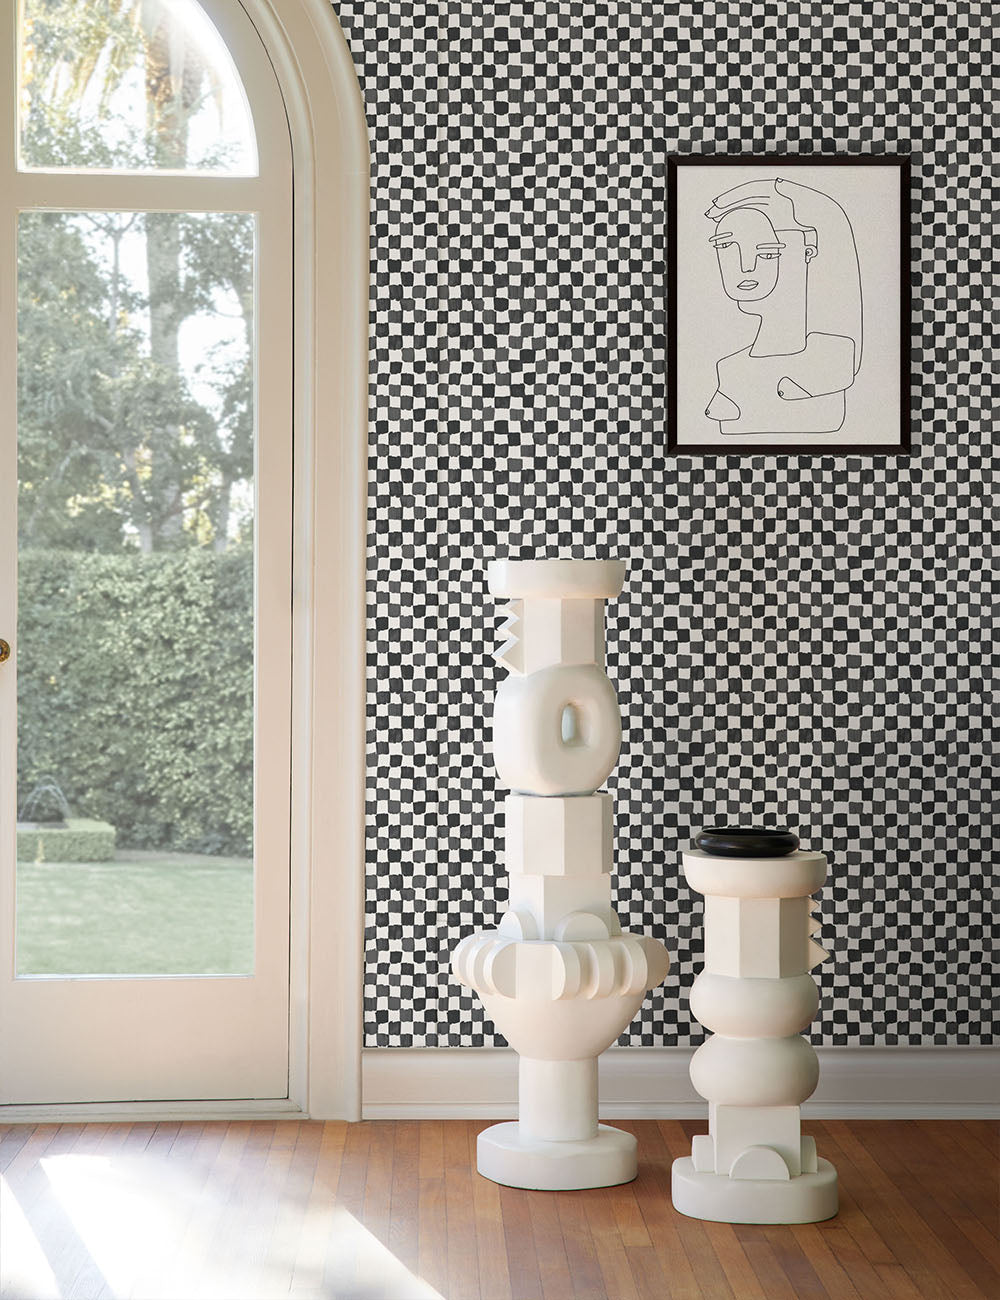 The black and white Checkerboard Wallpaper by Sarah Sherman Samuel sets a modern and eclectic feel with two white sculptures and a black and white line drawing.